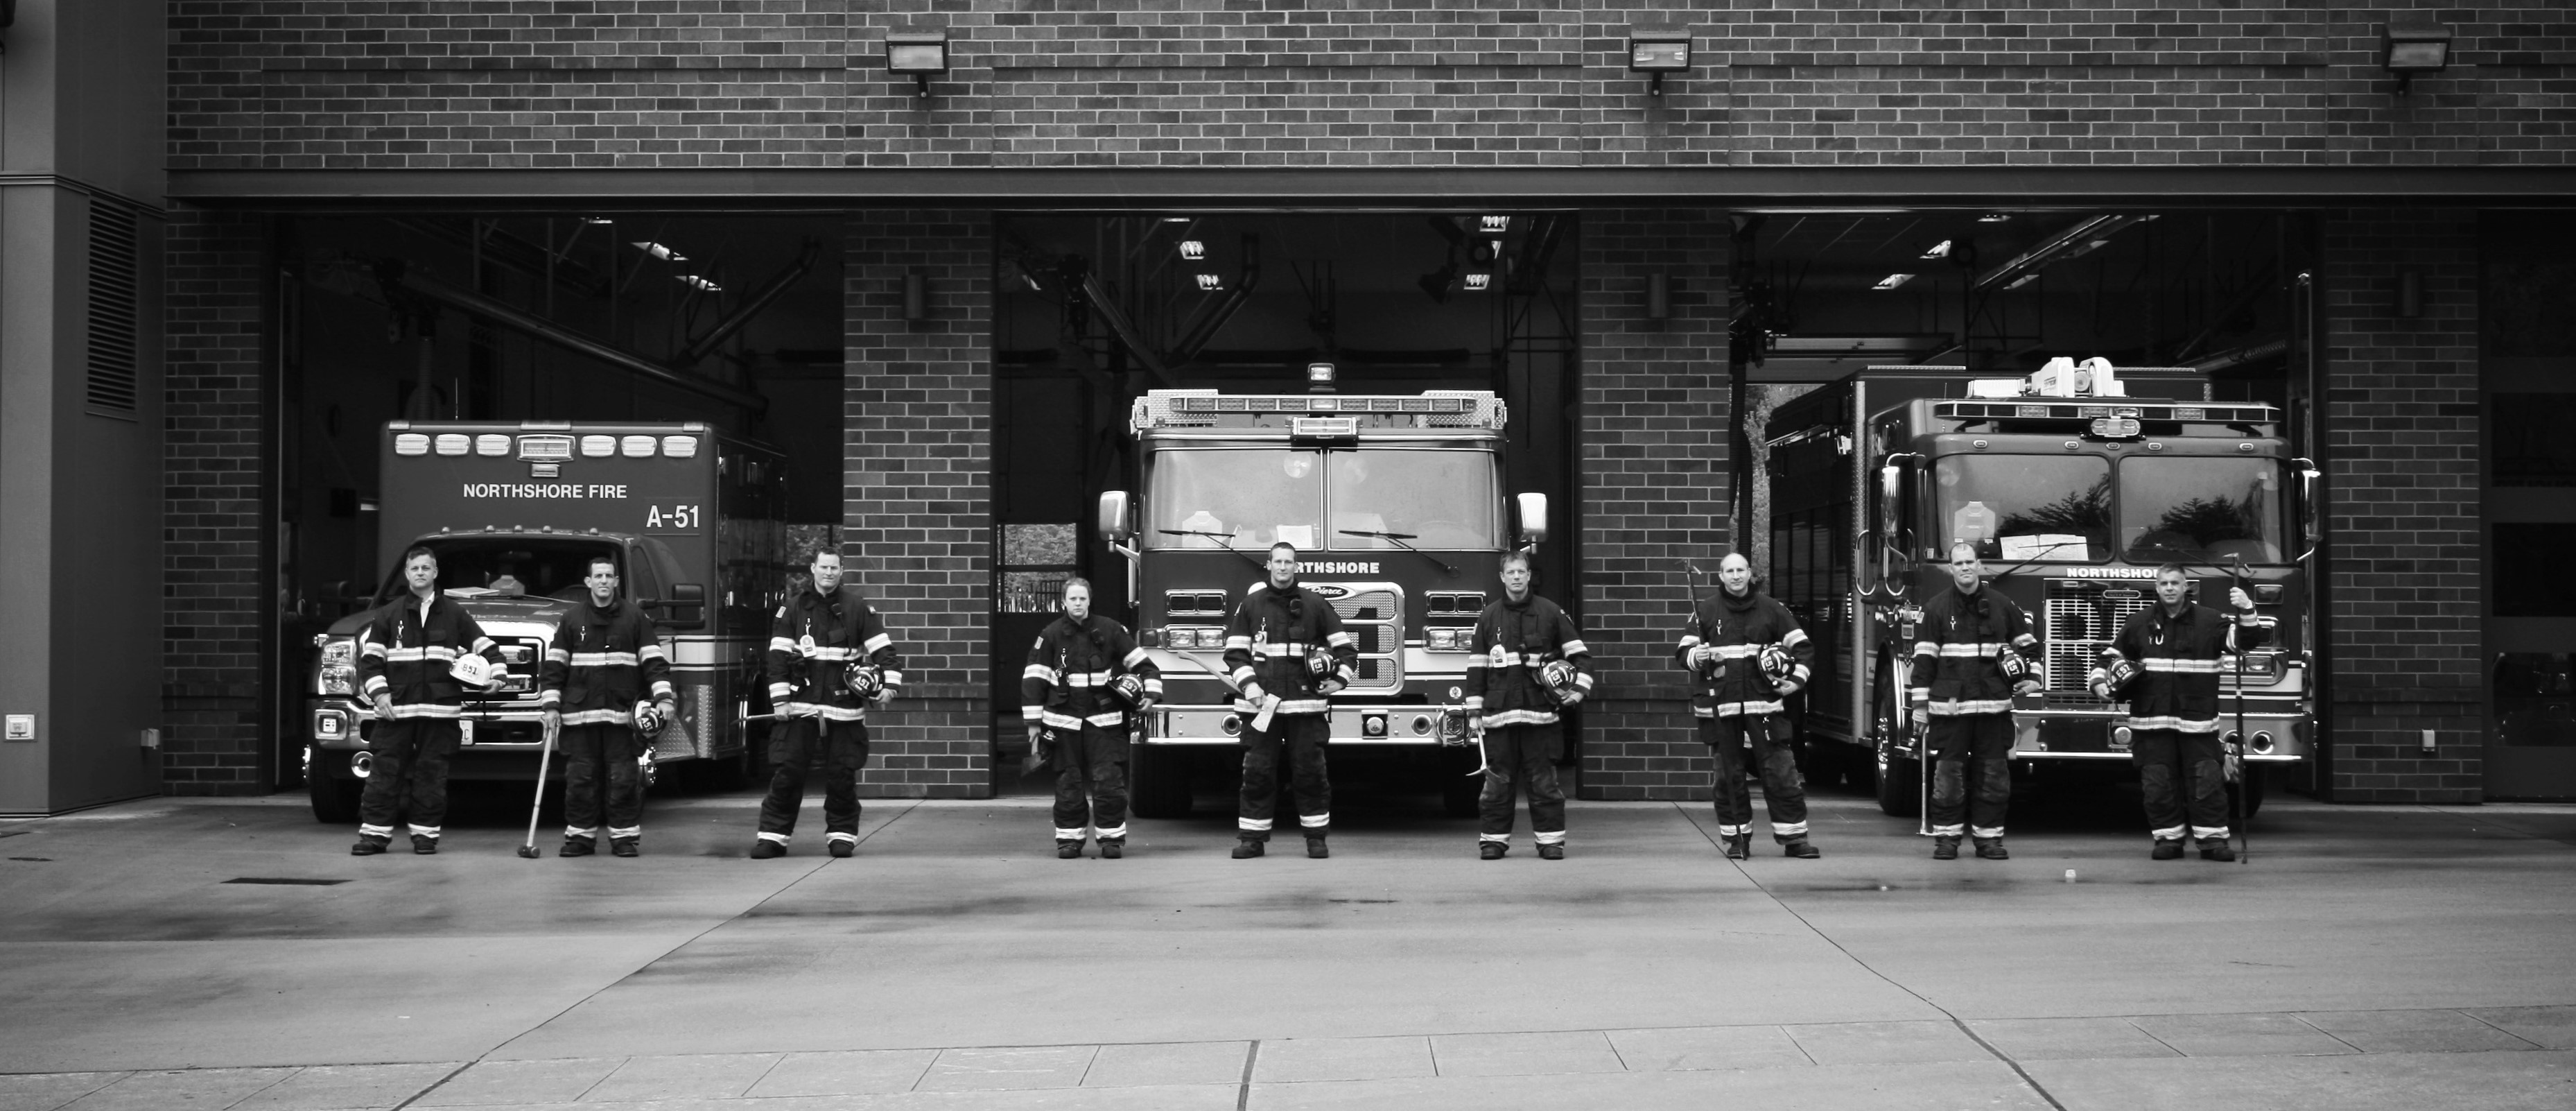 Fire fighters posing in front of engines